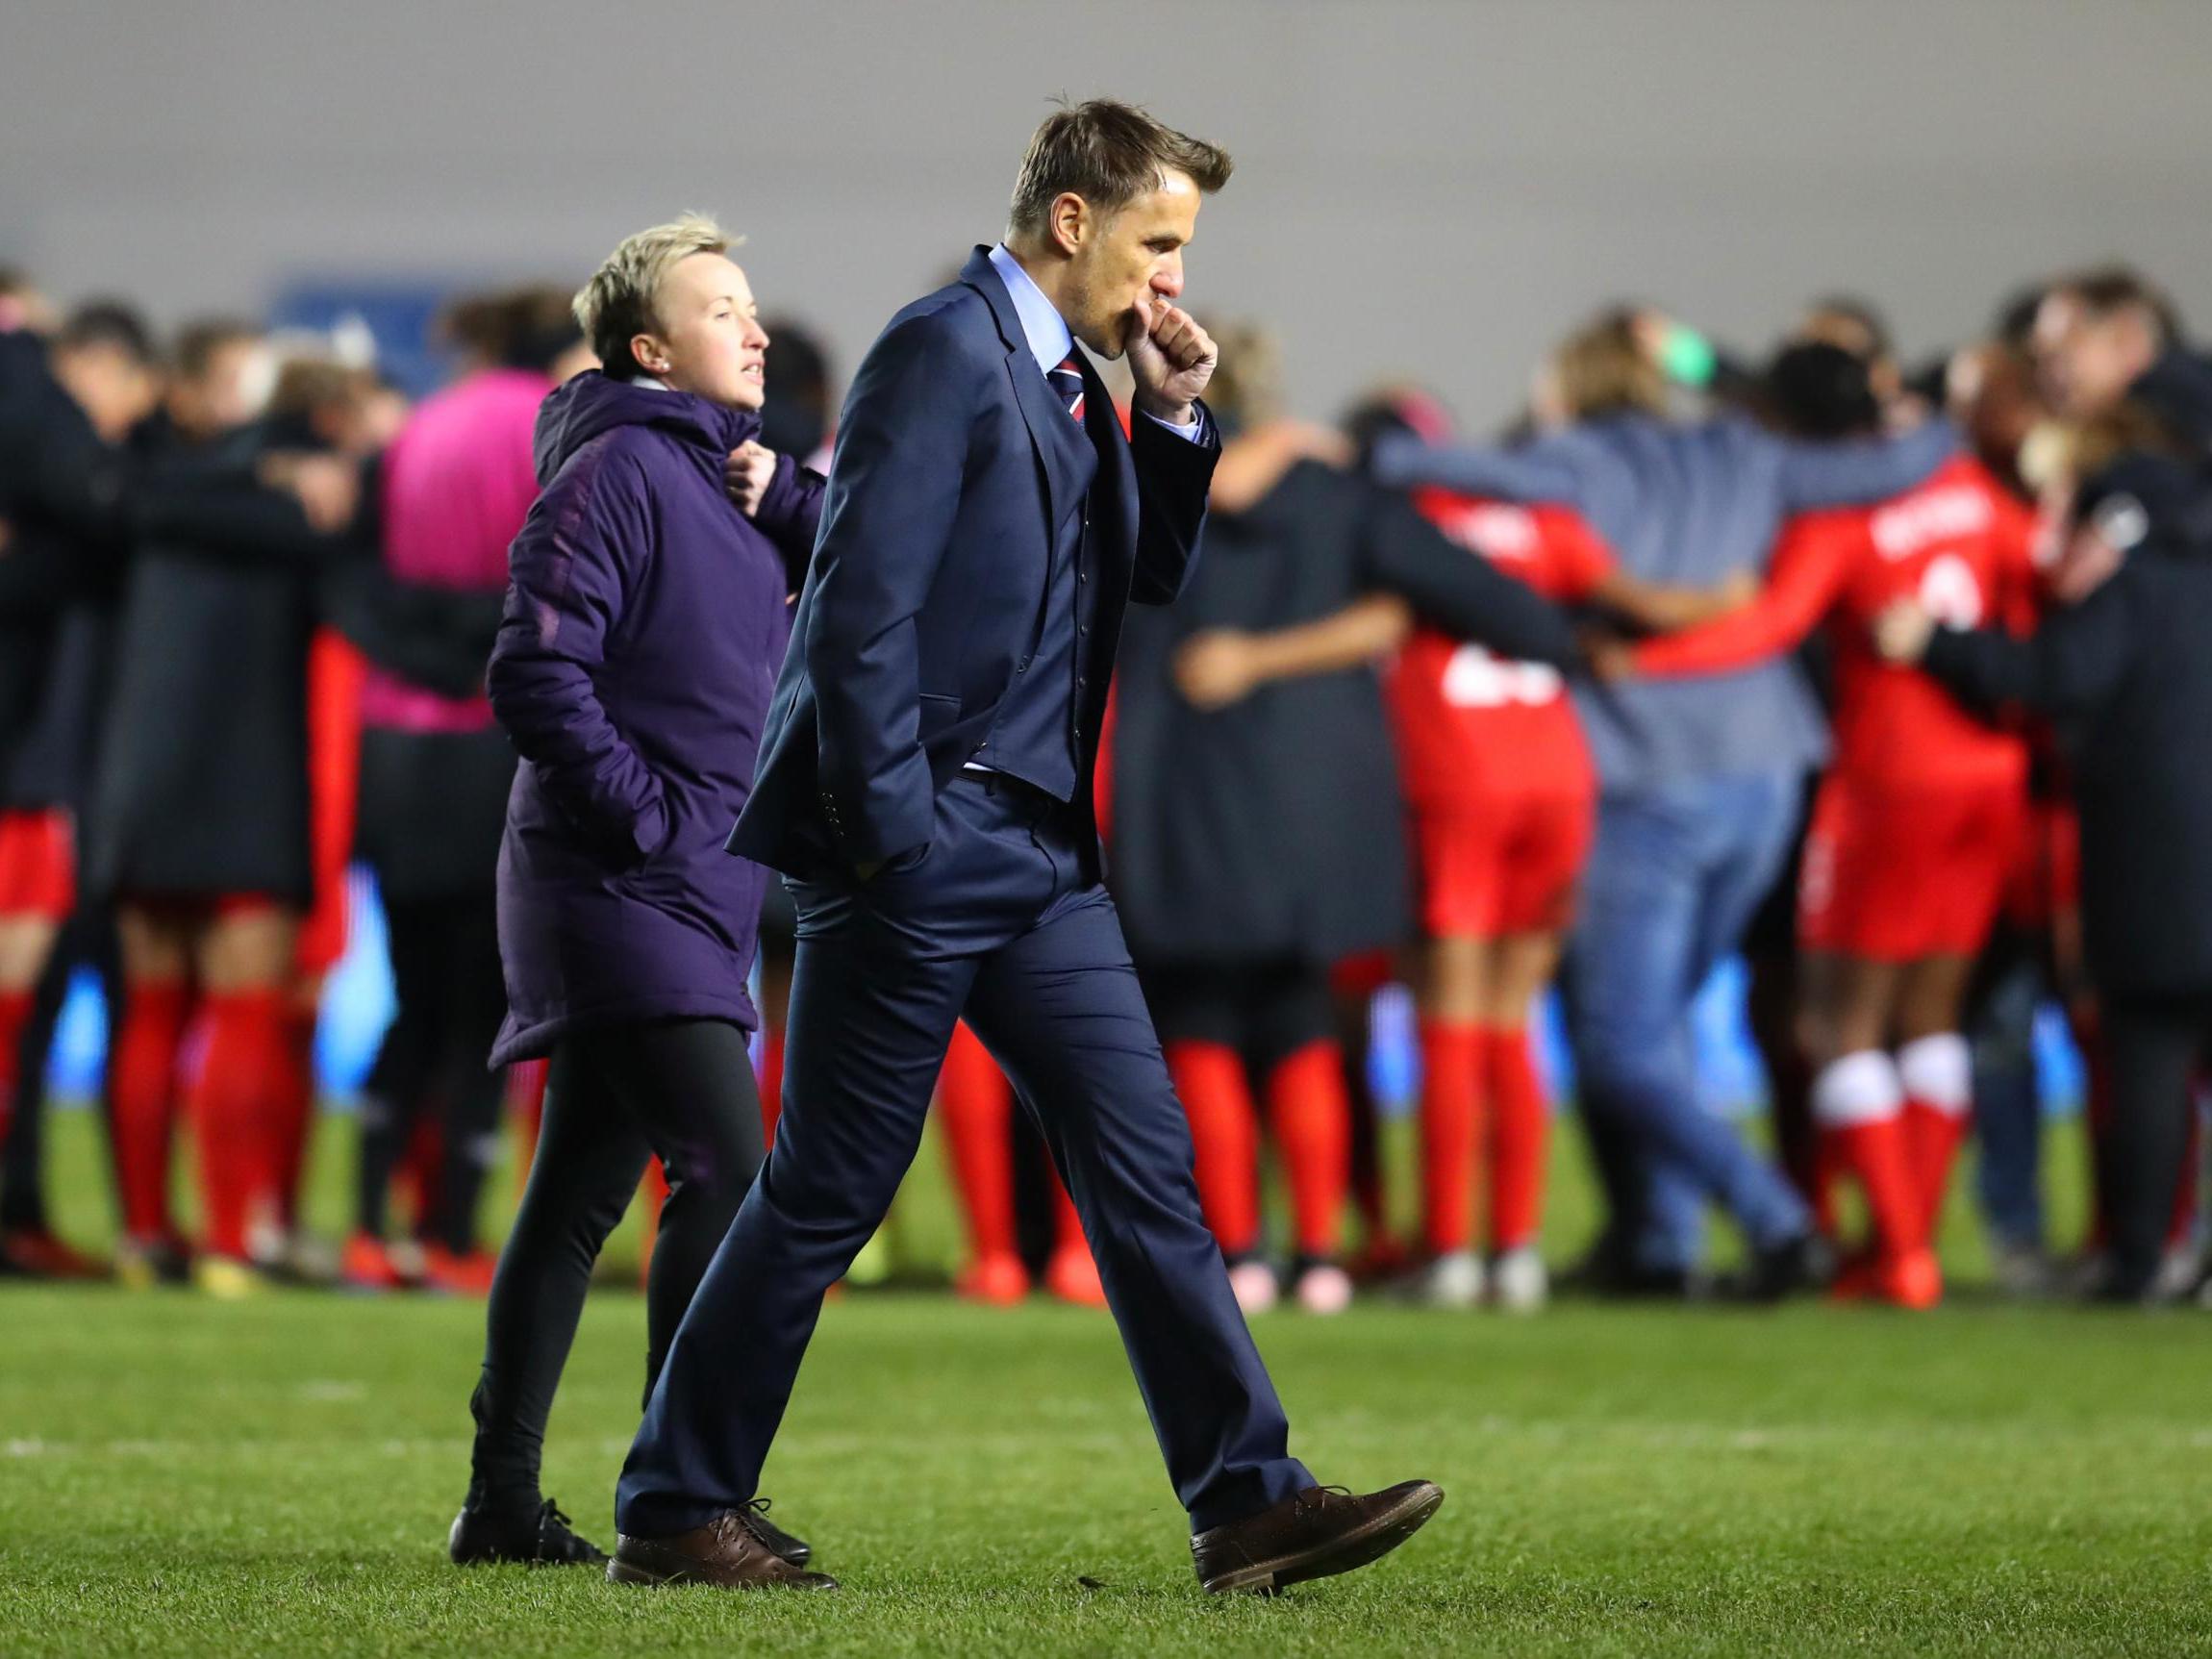 Phil Neville and Bev Priestman look on after defeat in east Manchester